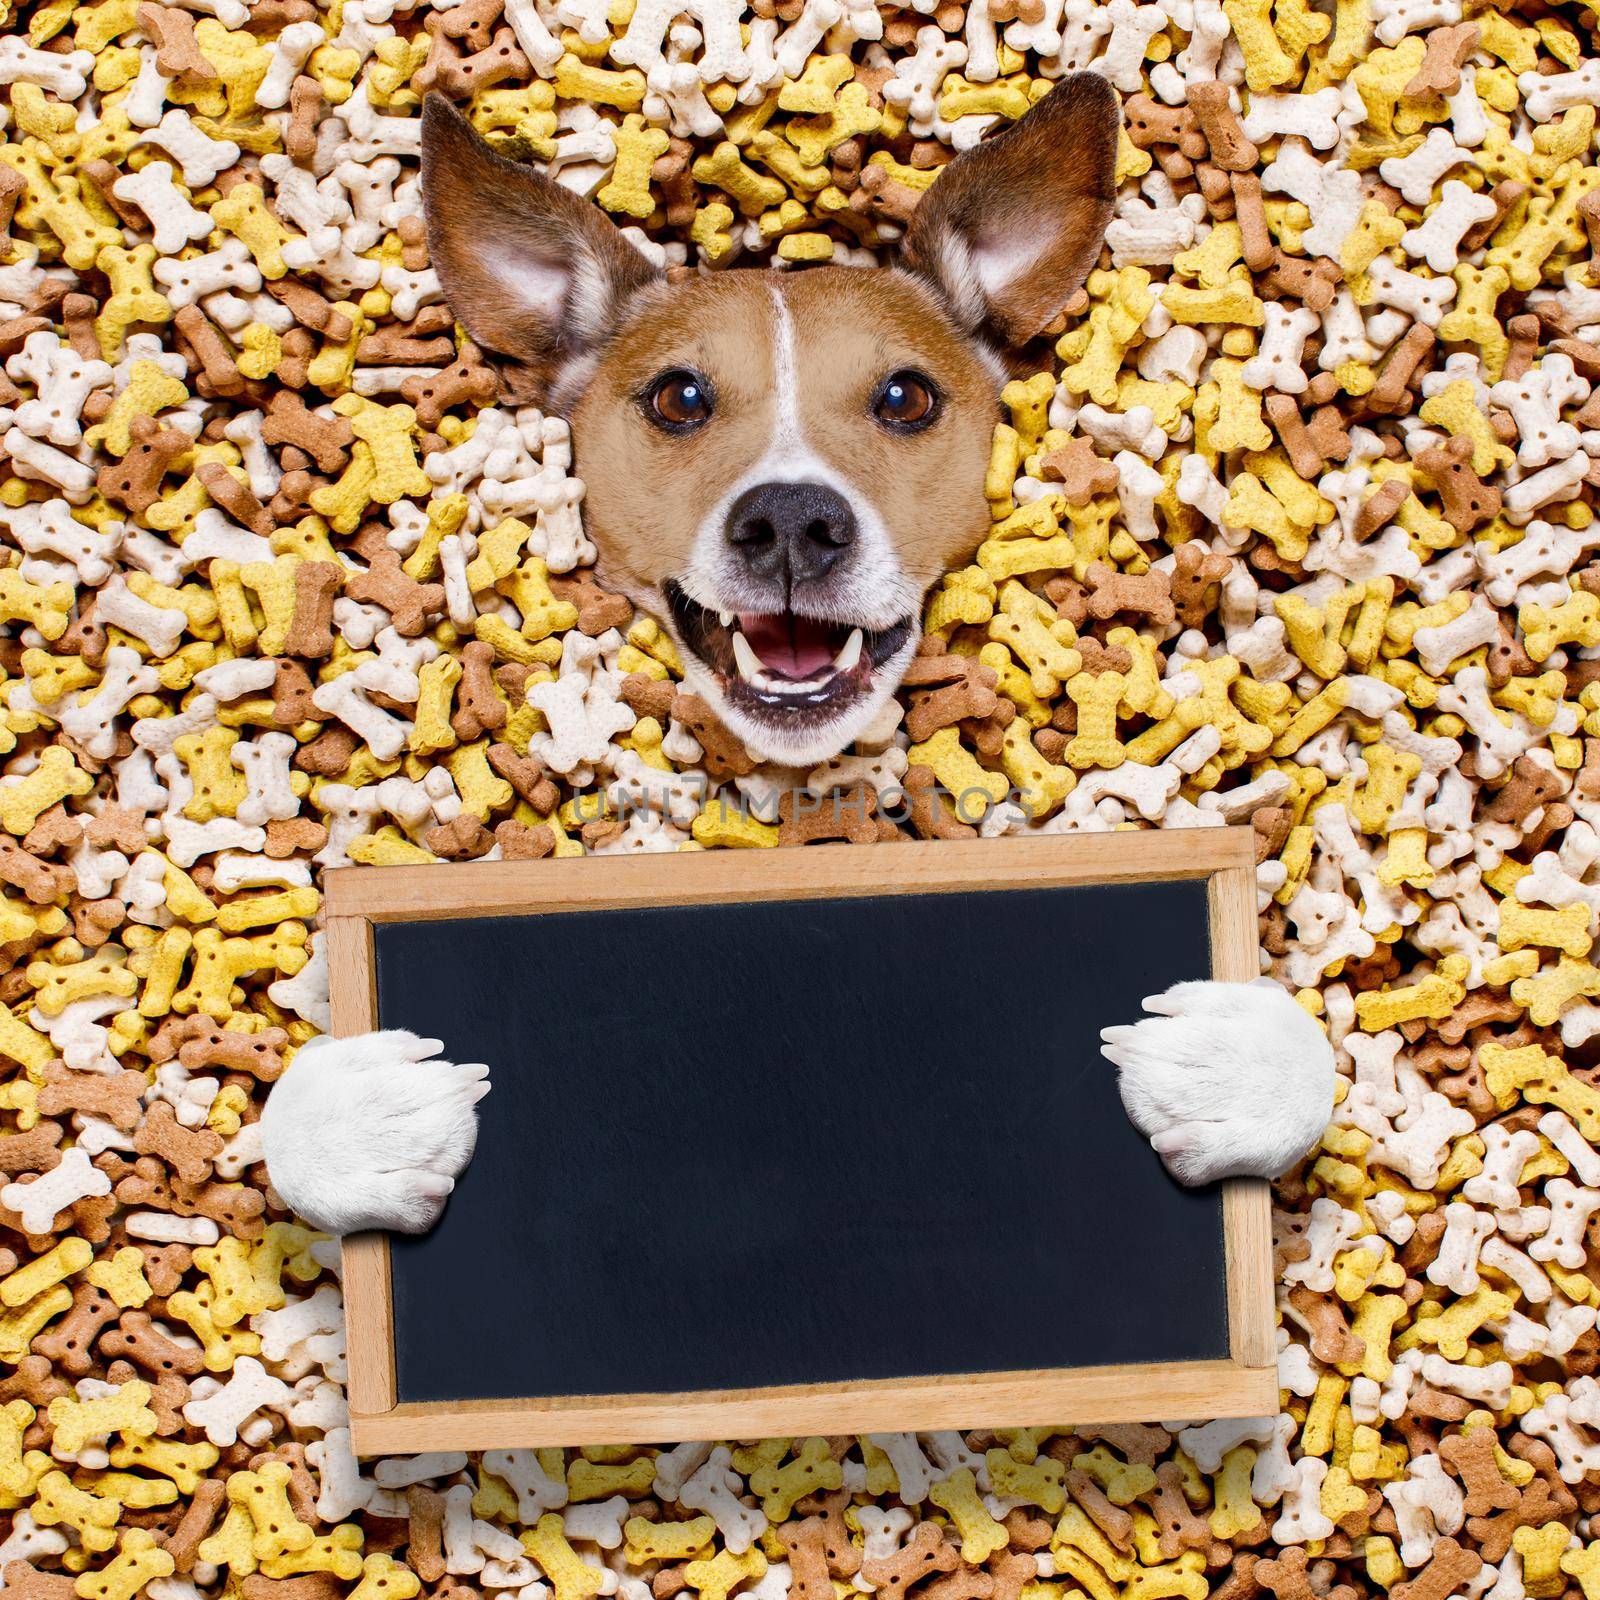 hungry jack russell dog inside a big mound or cluster of food , isolated on mountain of cookie bone  treats as background,with  a blank empty banner or placard blackboard